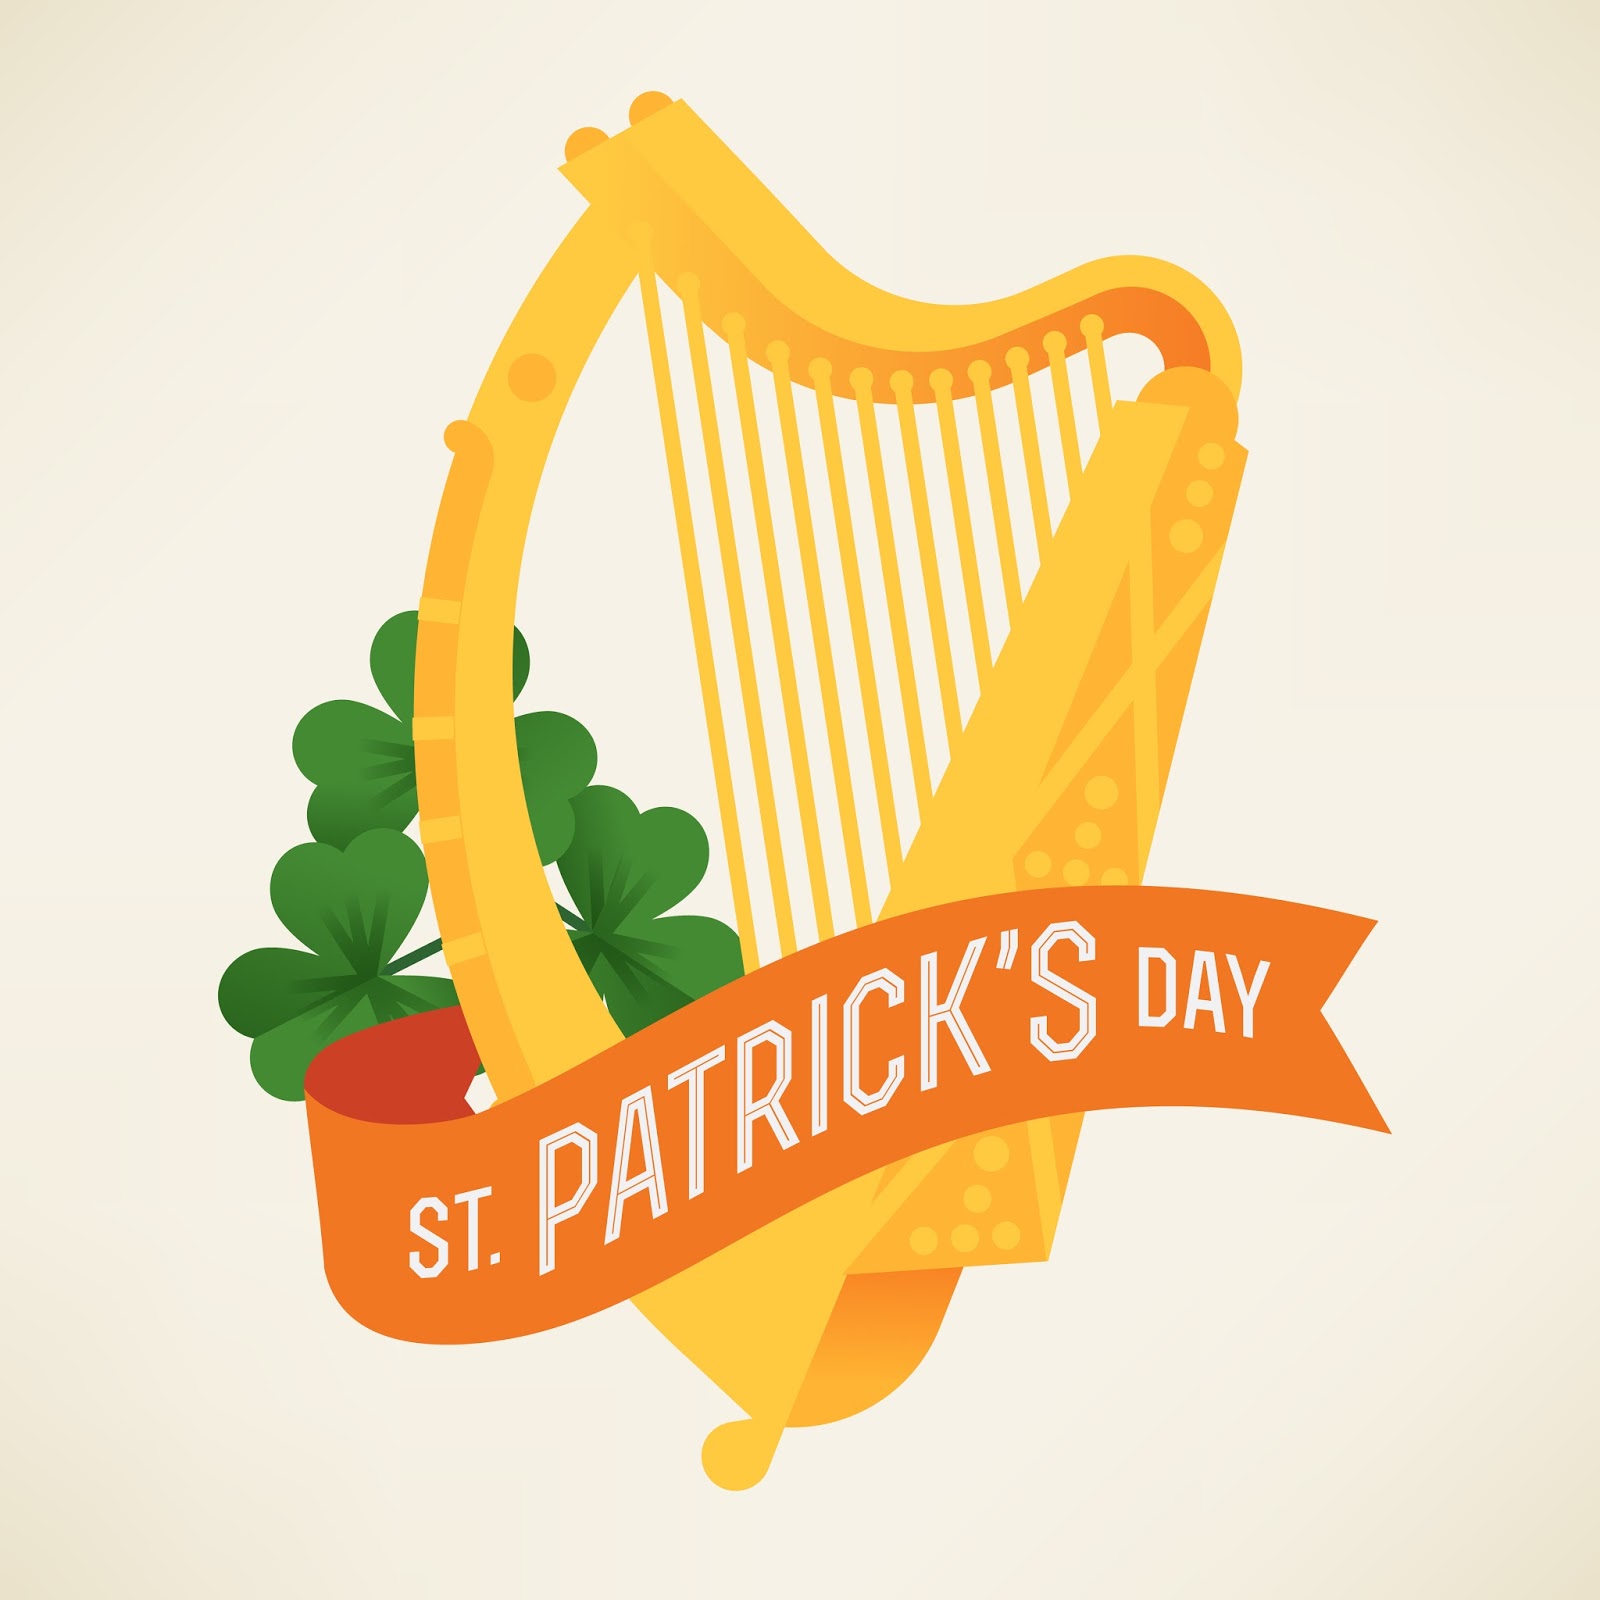 St. Patrick's Day Symbols and Traditions